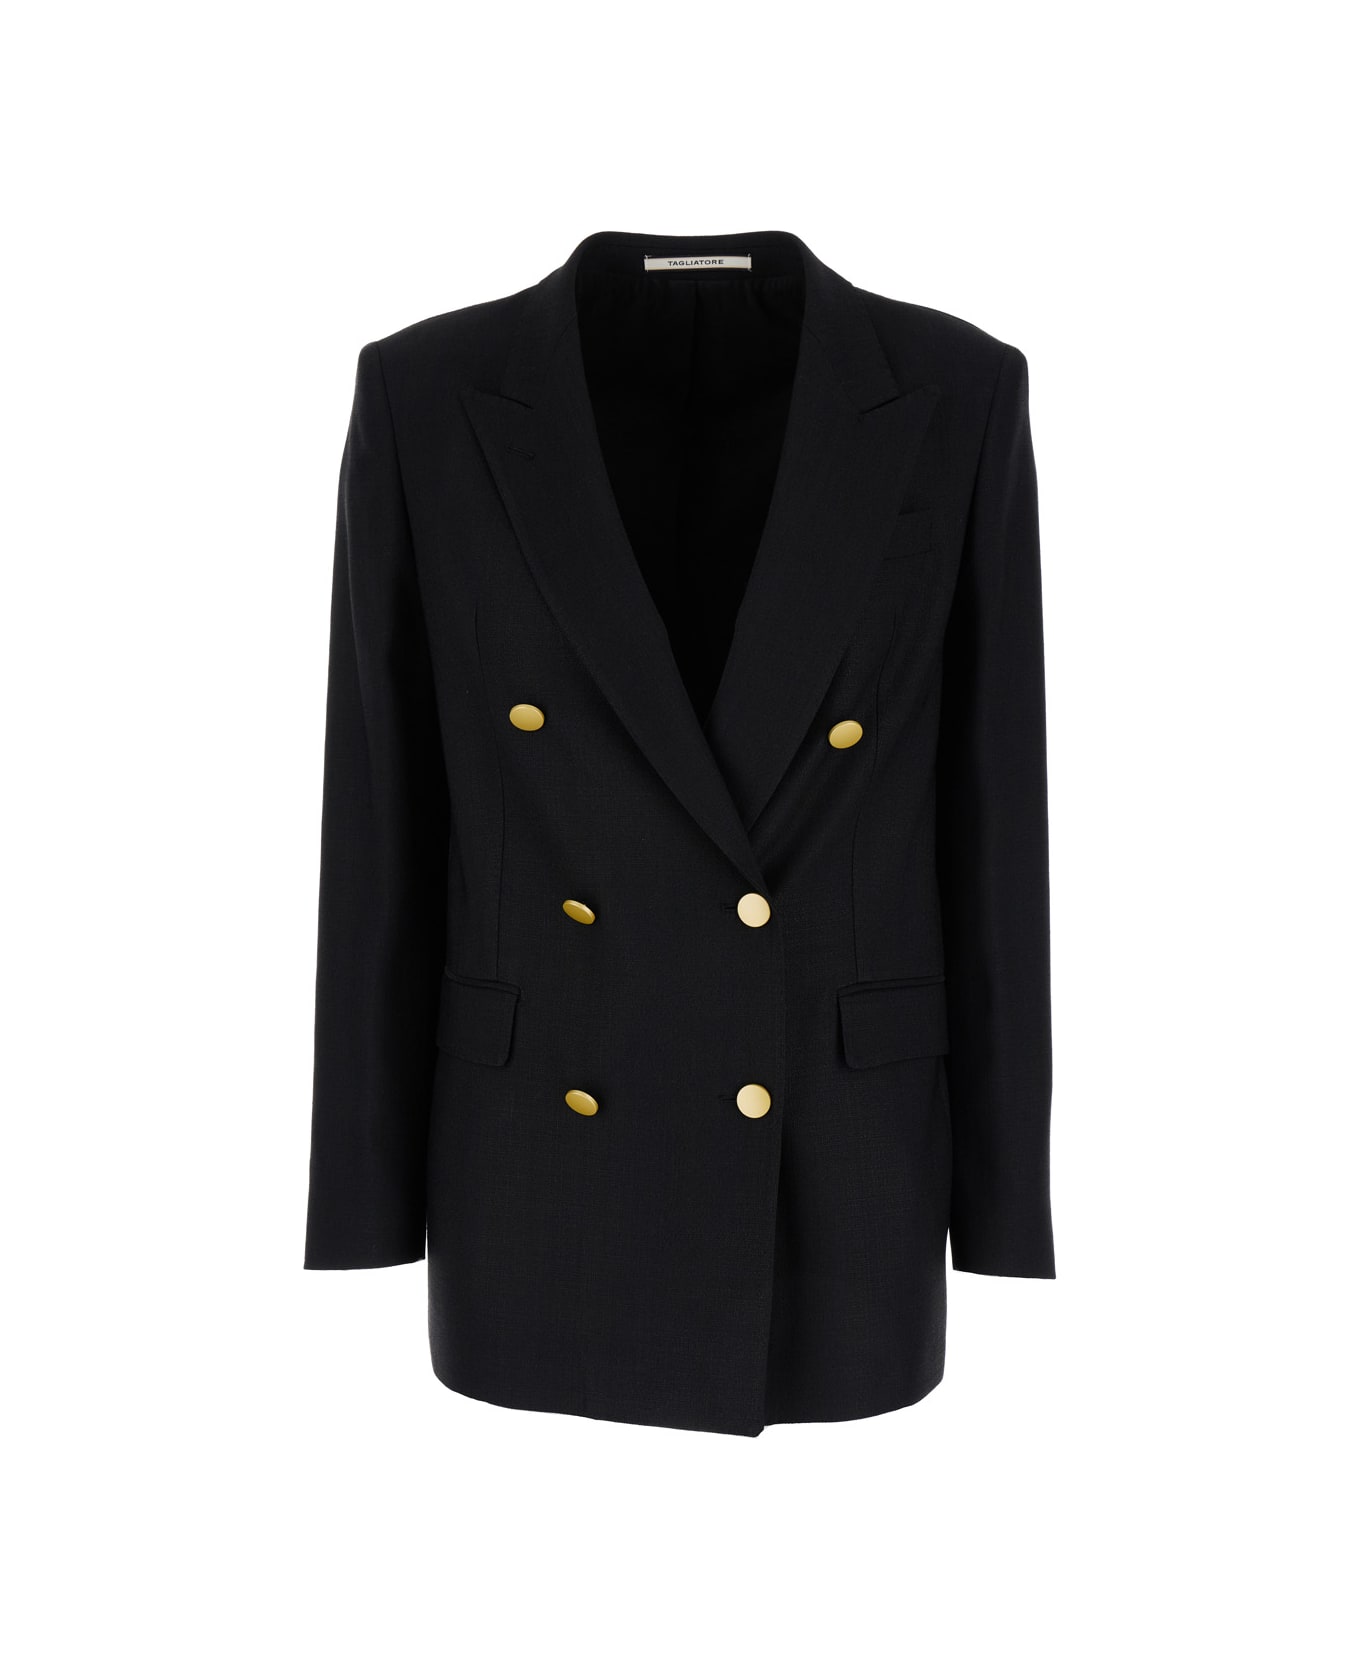 Tagliatore Black Double-breasted Blazer With Gold-tone Buttons In Viscose Blend Woman - Black